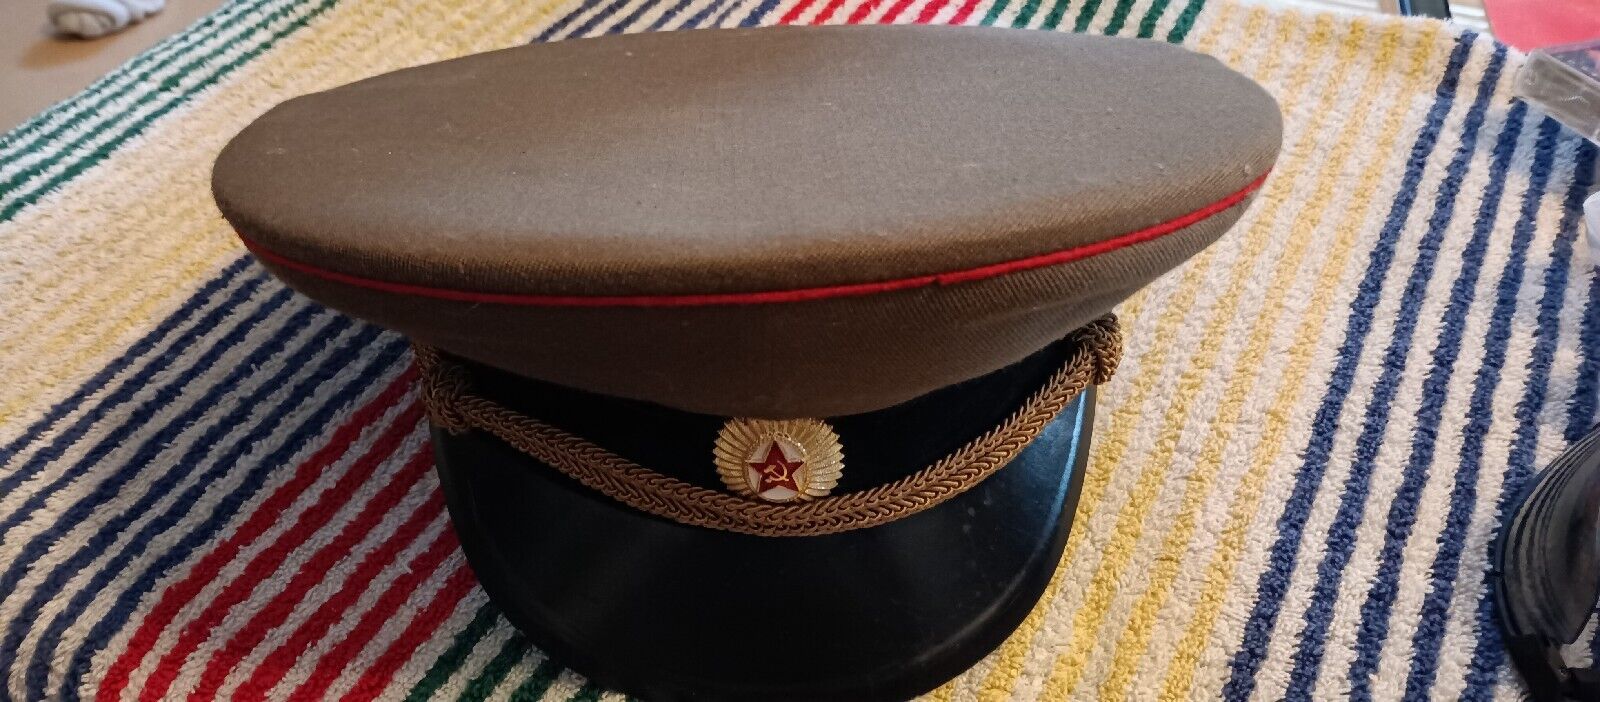 Vintage Russian military hat size 57 Soviet Union era Rusky Officer KGB used